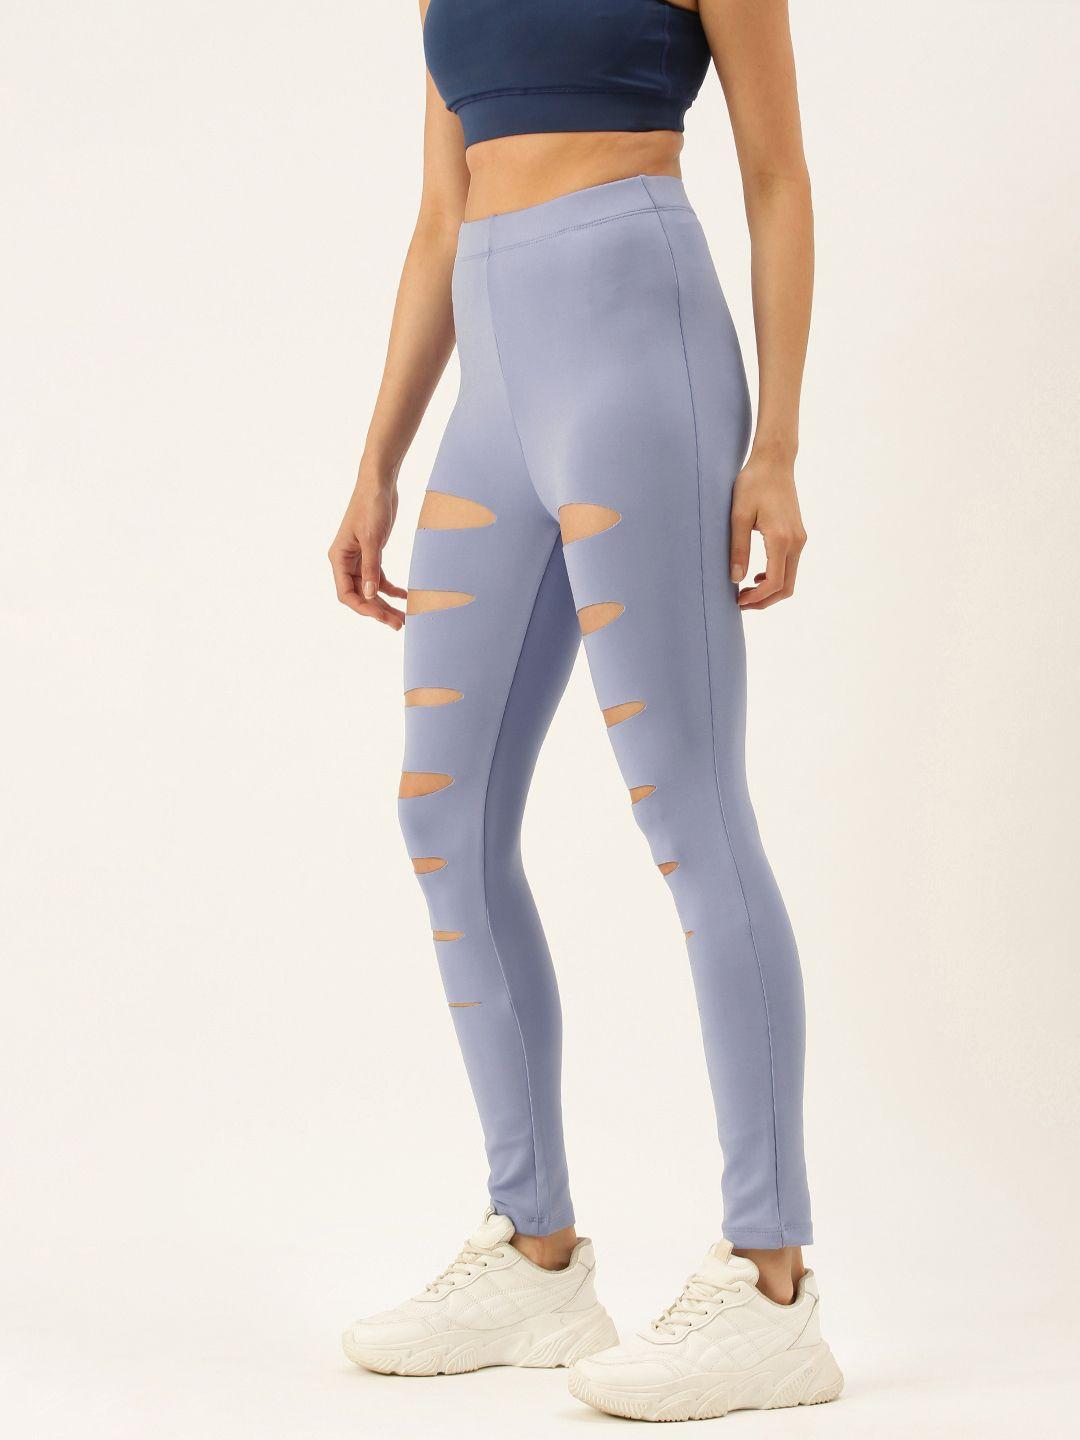 forever 21 women lavender solid ankle-length leggings with cut out details